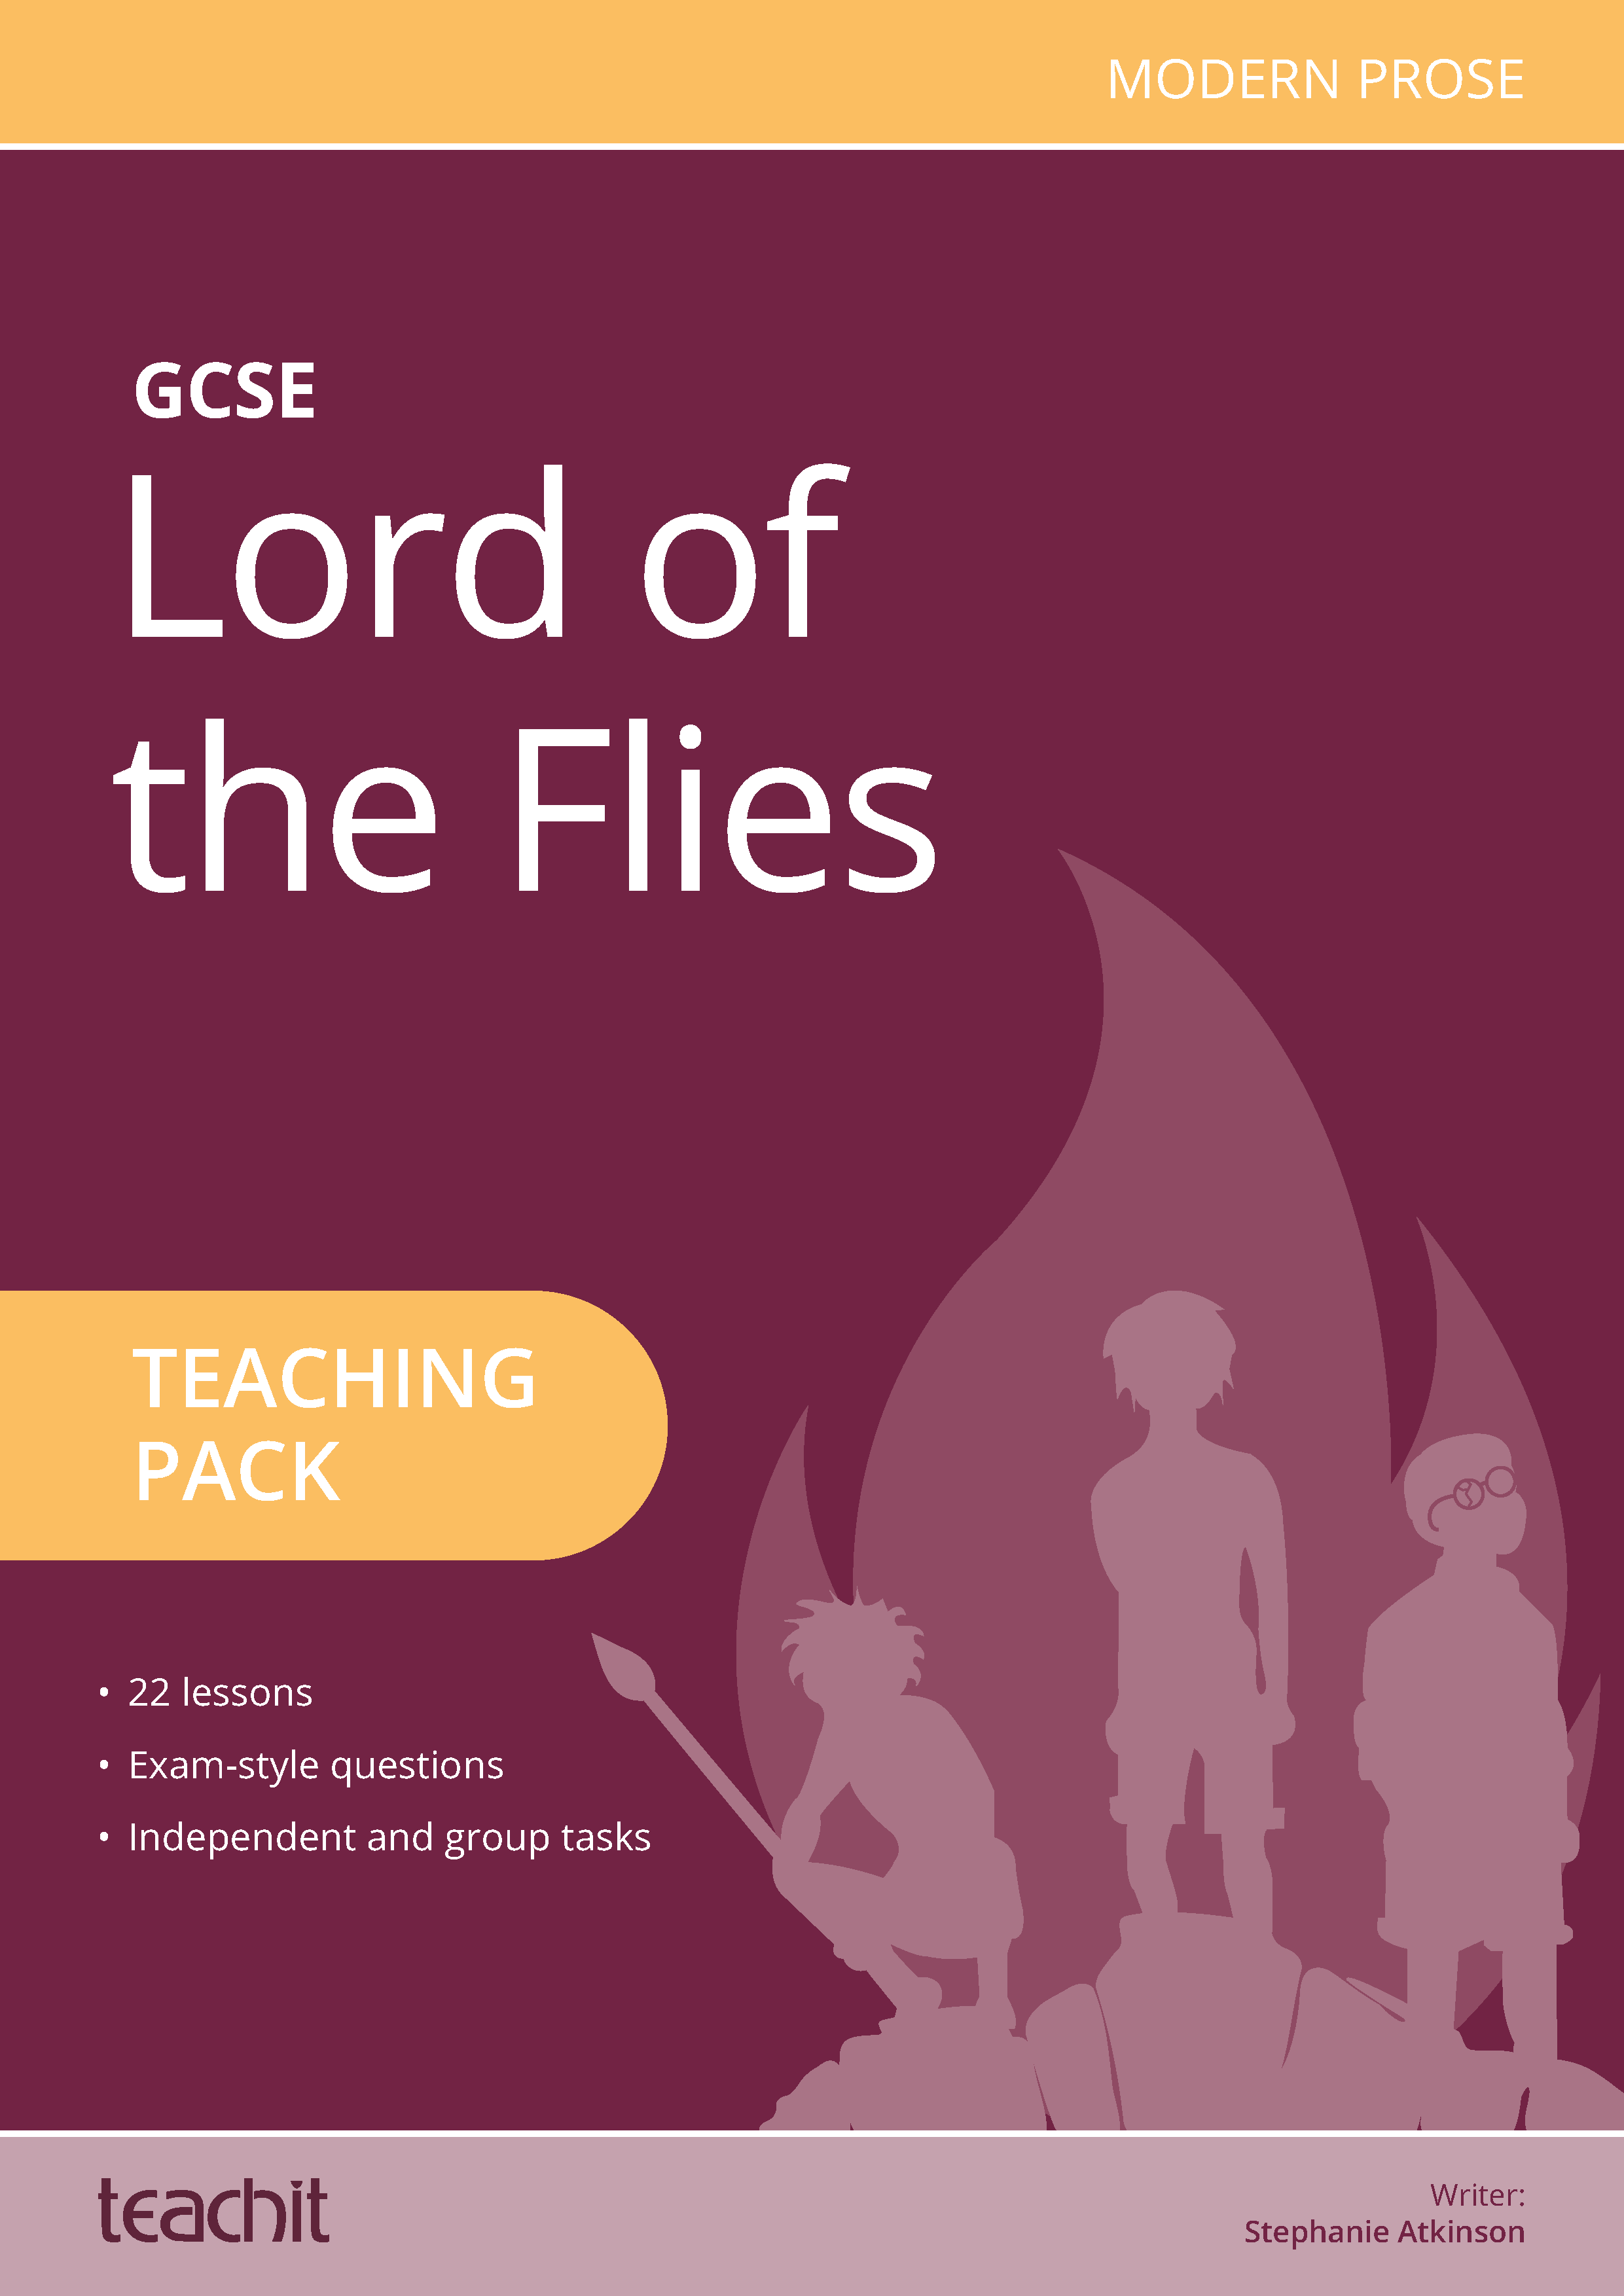 Lord of the Flies Chapter 4 Quiz, Close Reading, and Vocabulary Games Bundle